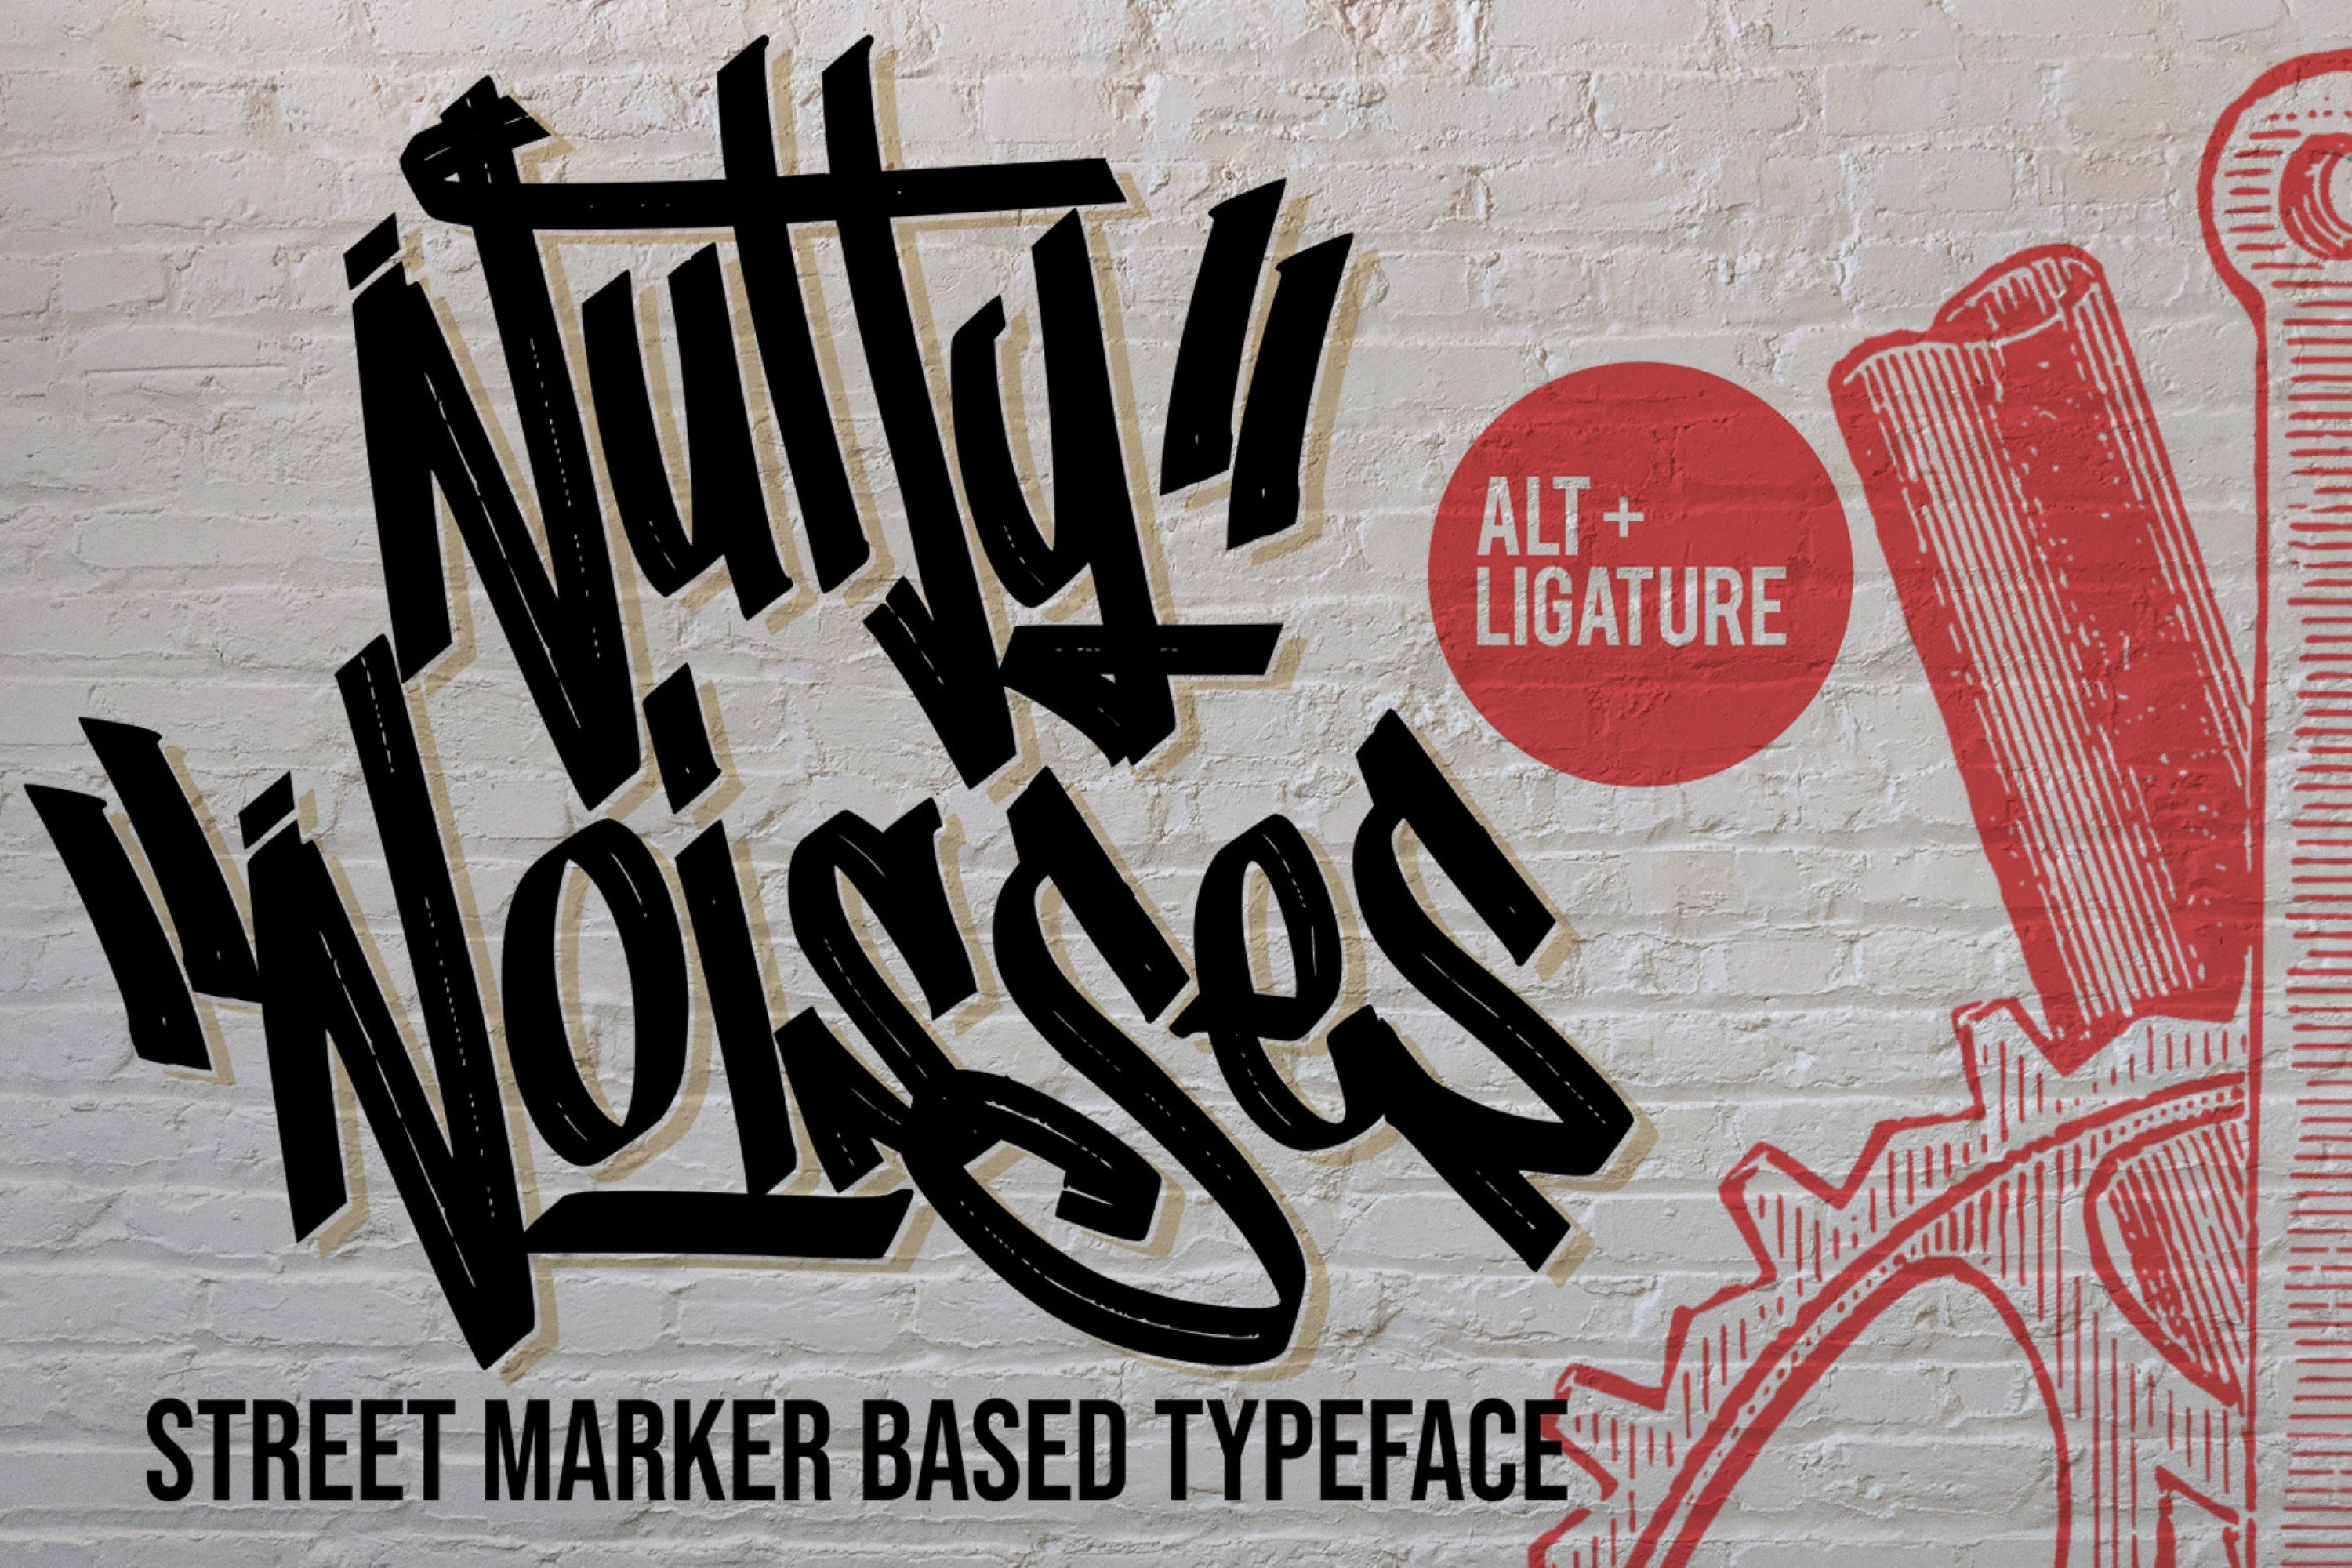 Nutty Noisses - Graffiti typeface cover image.